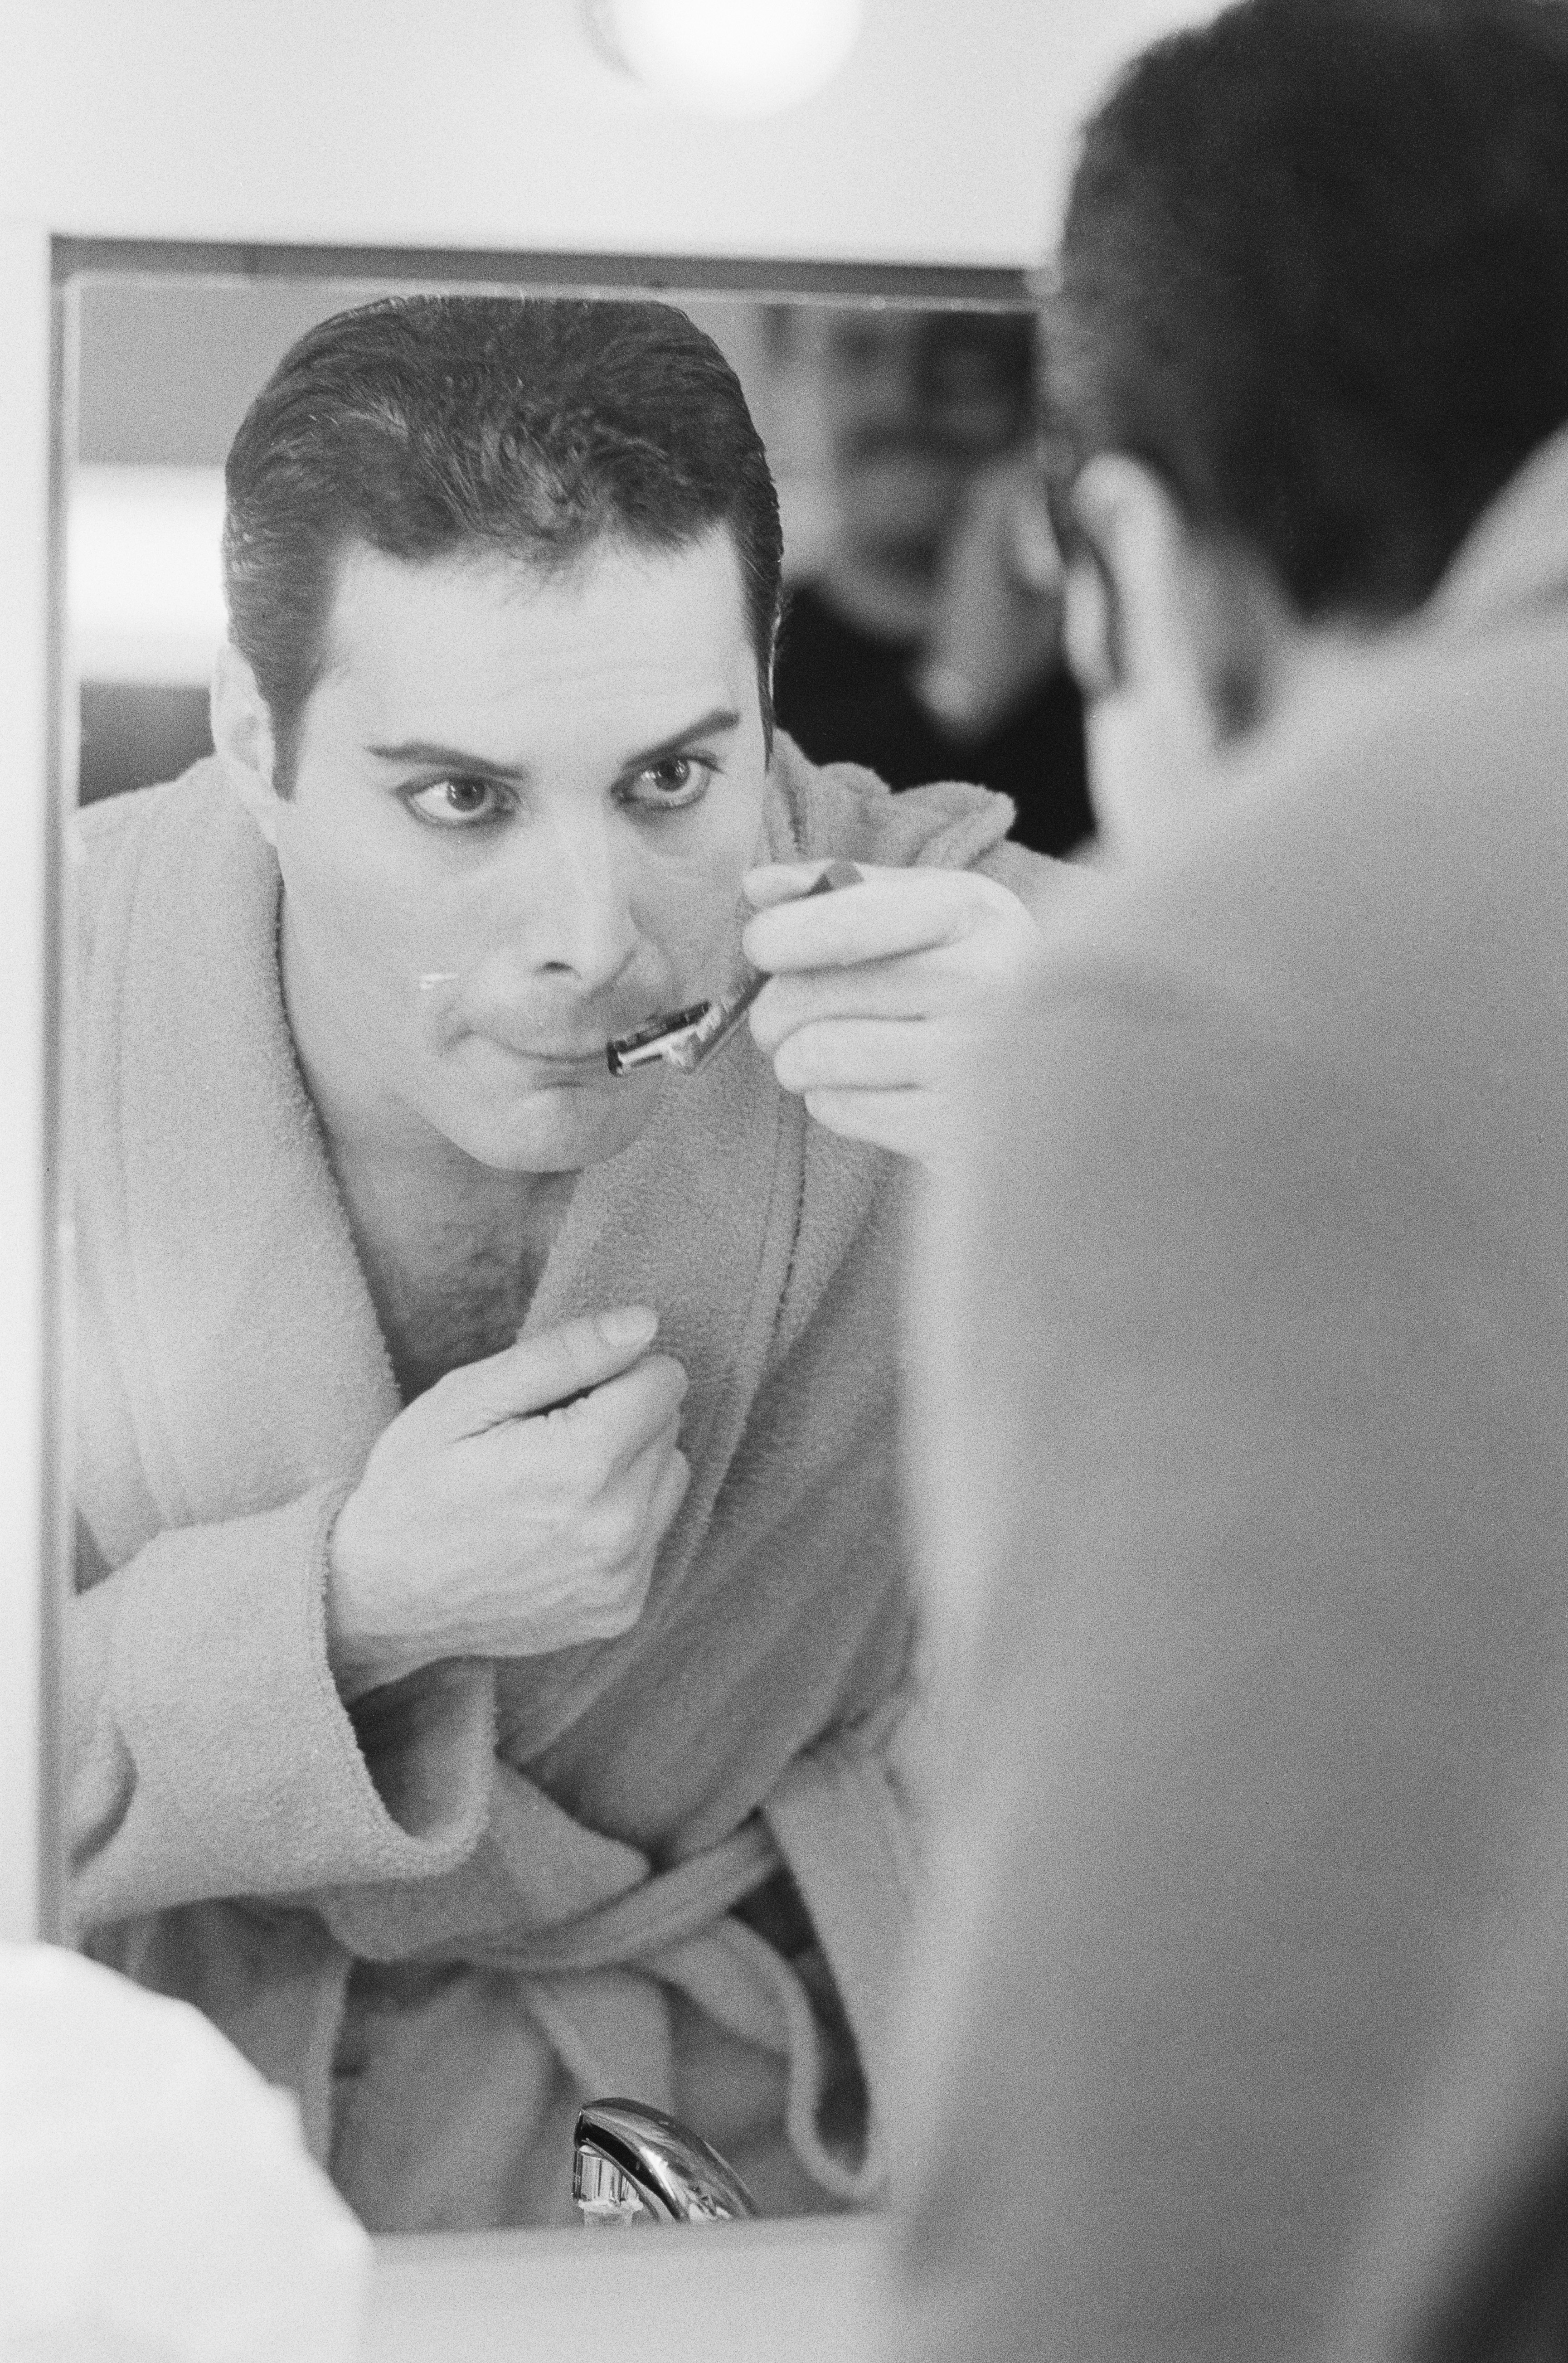 Queen frontman Freddie Mercury (1946 - 1991) shaving his moustache, 12th April 1984. (Photo by Steve Wood/Express/Getty Images)